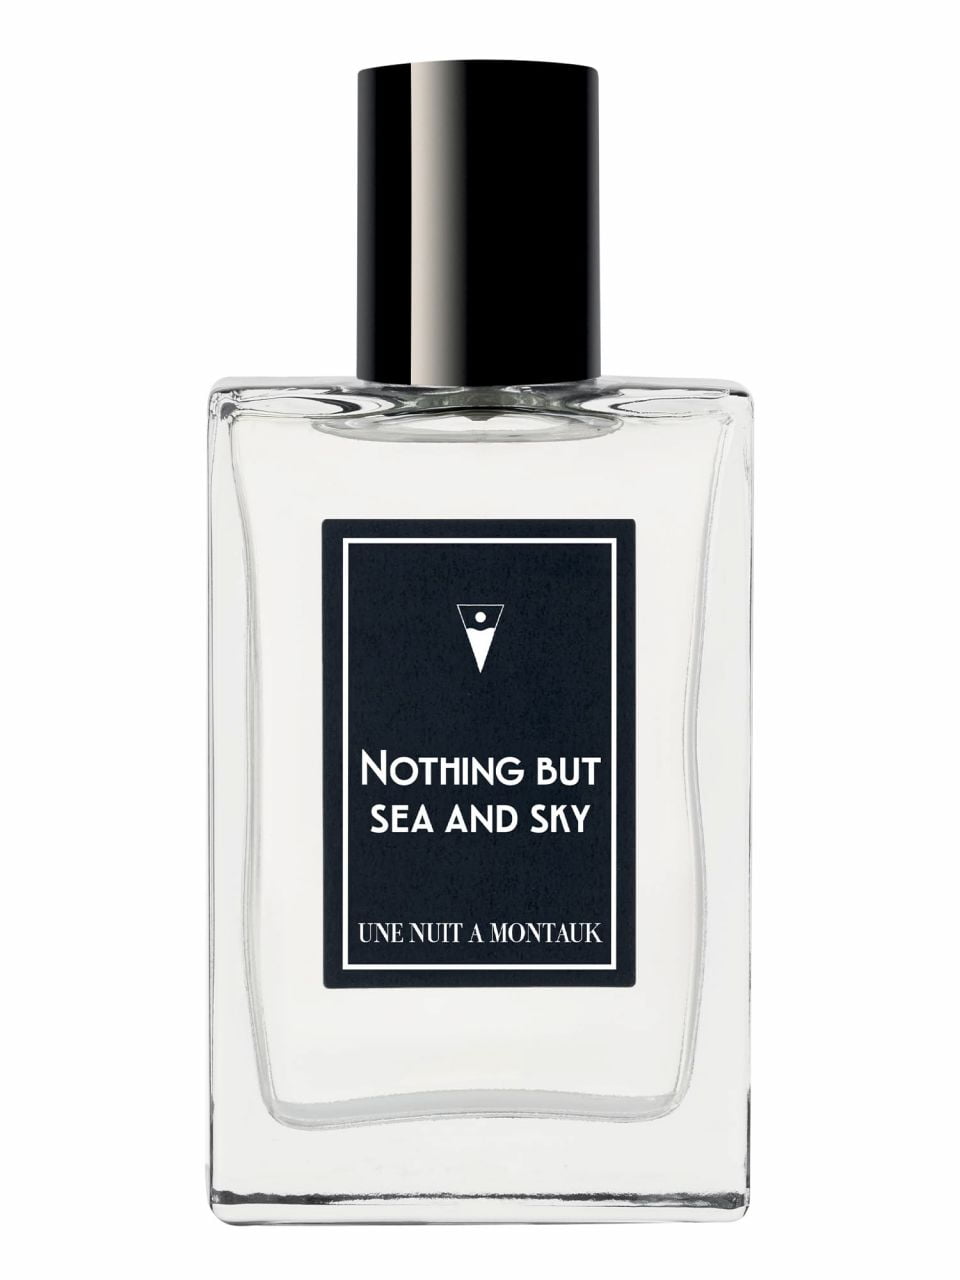 une nuit nomade 3770003193371 nothing but sea and sky 50ml